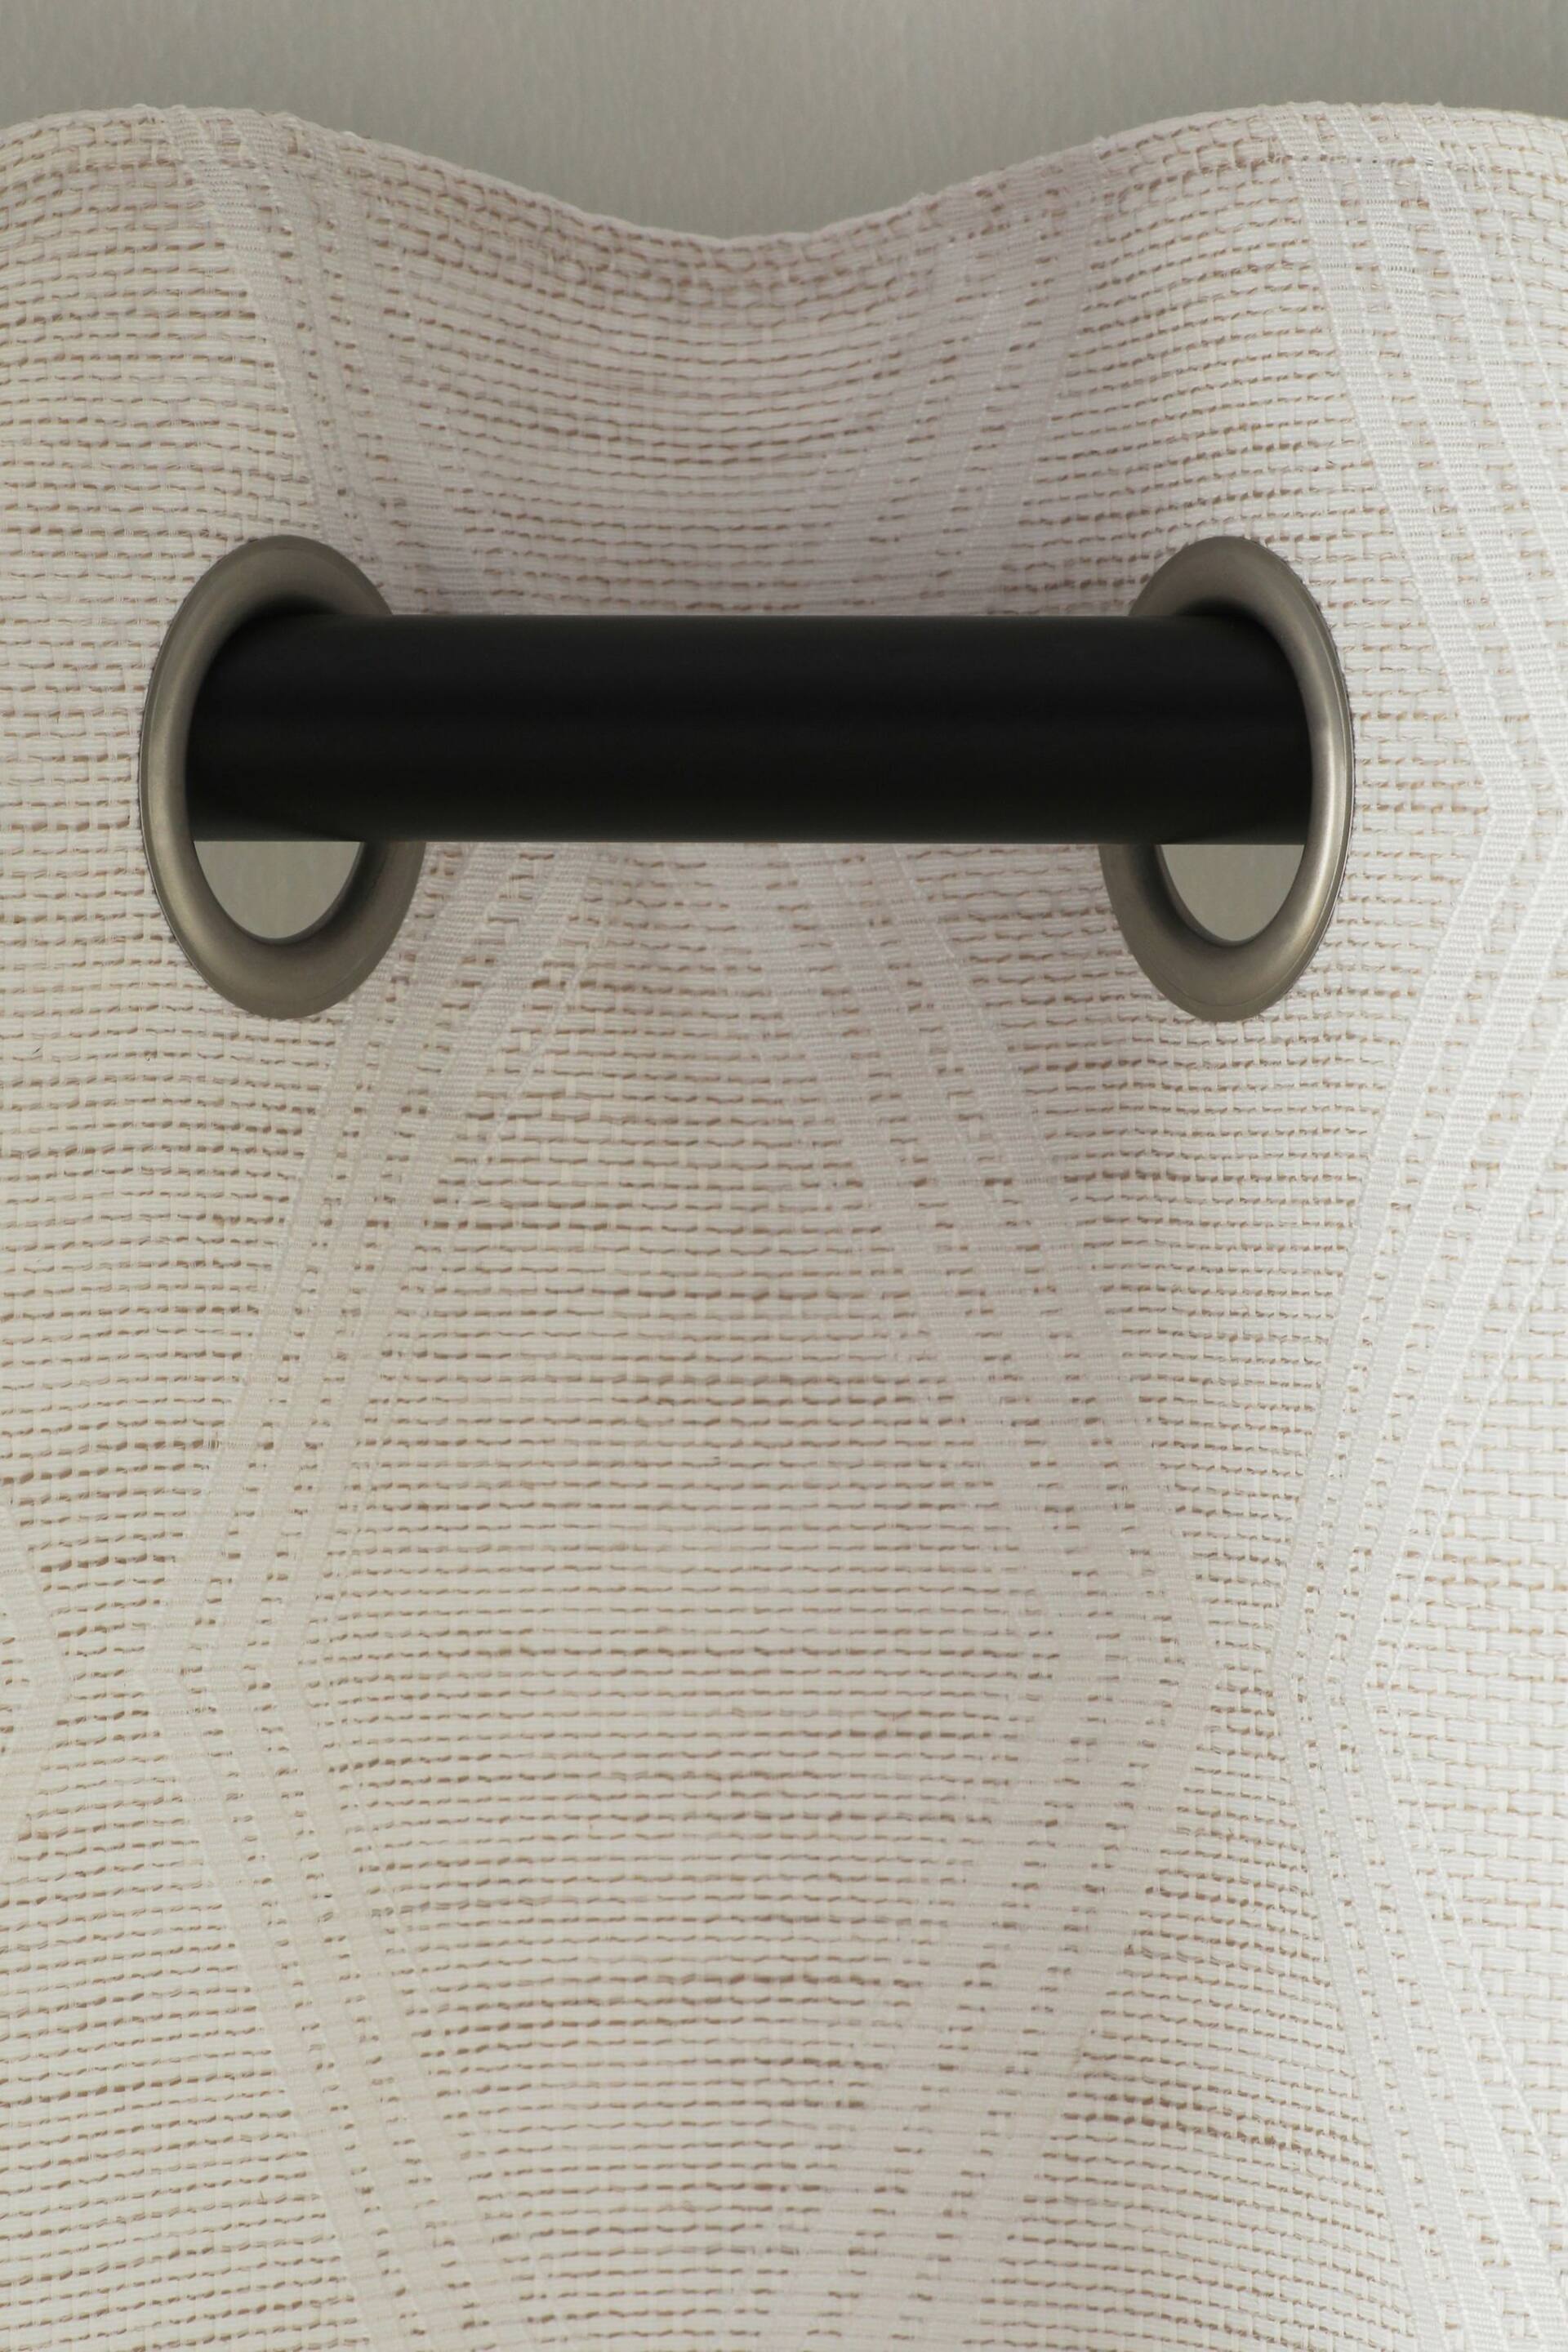 Natural Next Textured Jacquard Eyelet Lined Curtains - Image 4 of 6